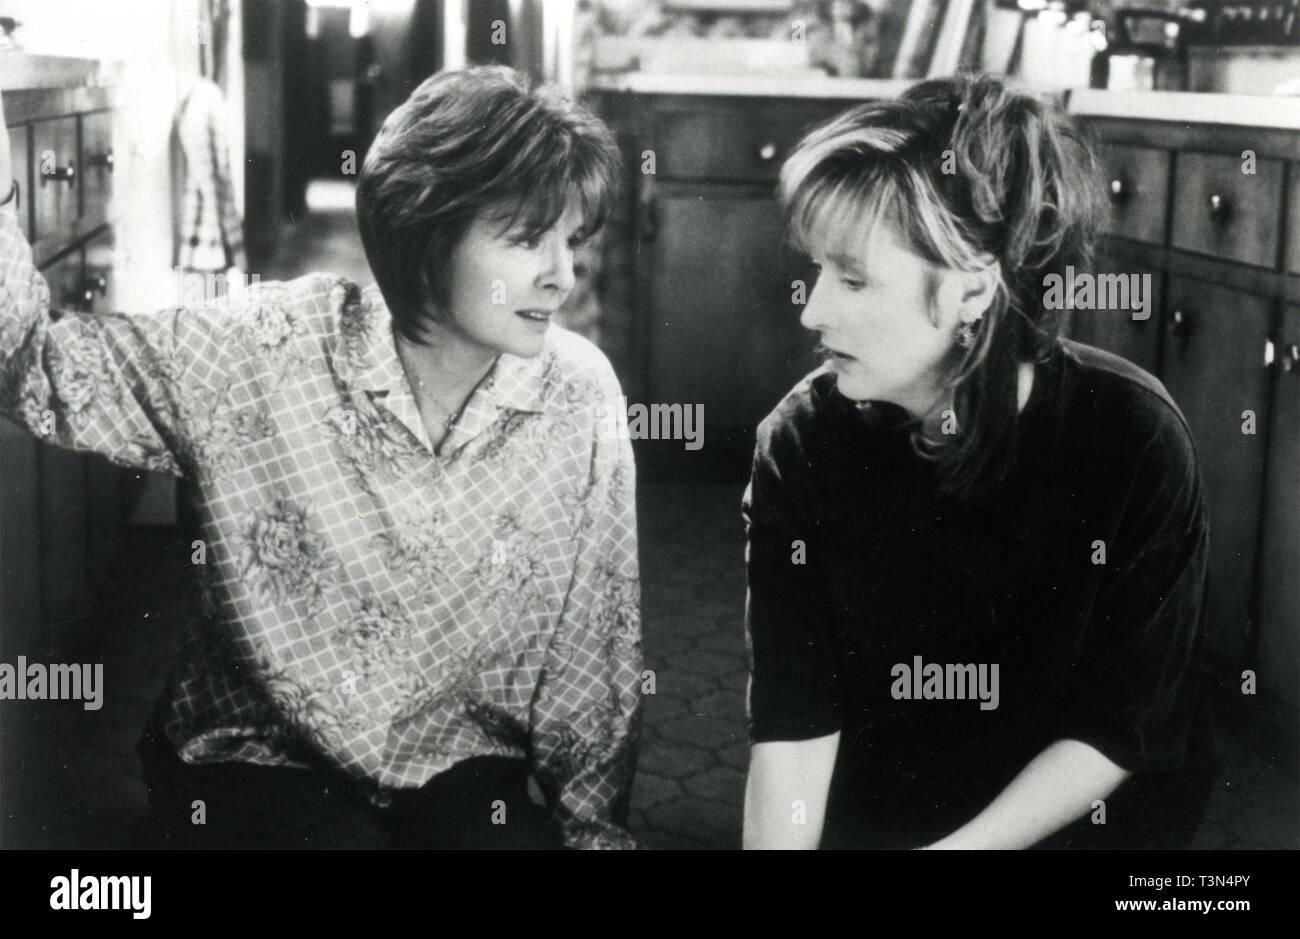 American Actresses Meryl Streep And Diane Keaton In The